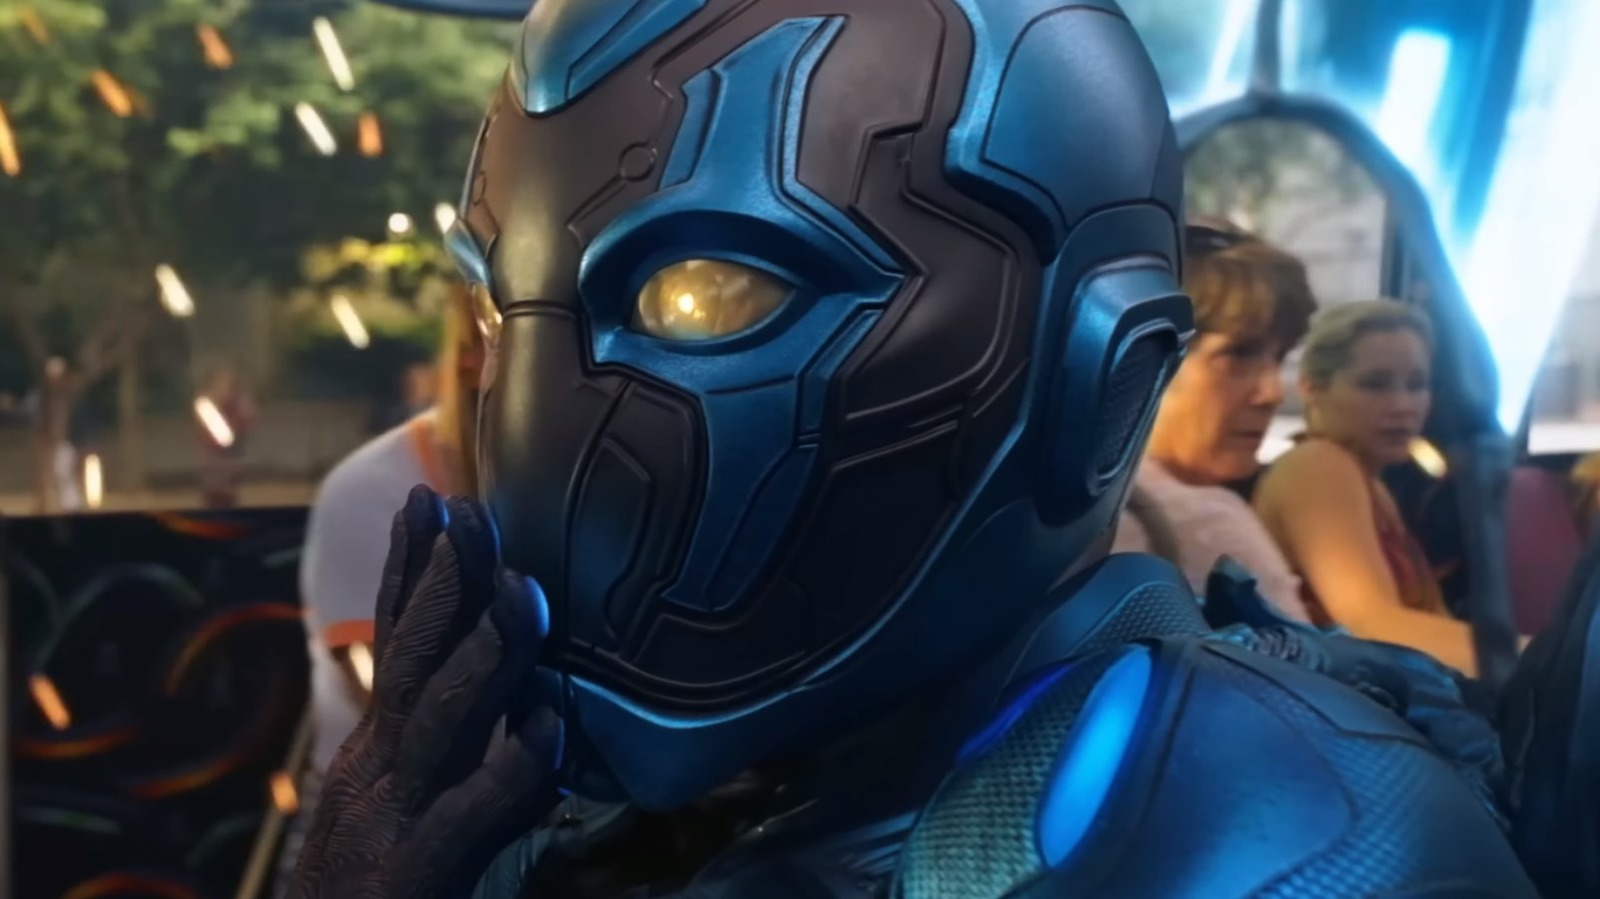 Even If It's Really Good, DC's Blue Beetle Faces An Uphill Box Office Battle